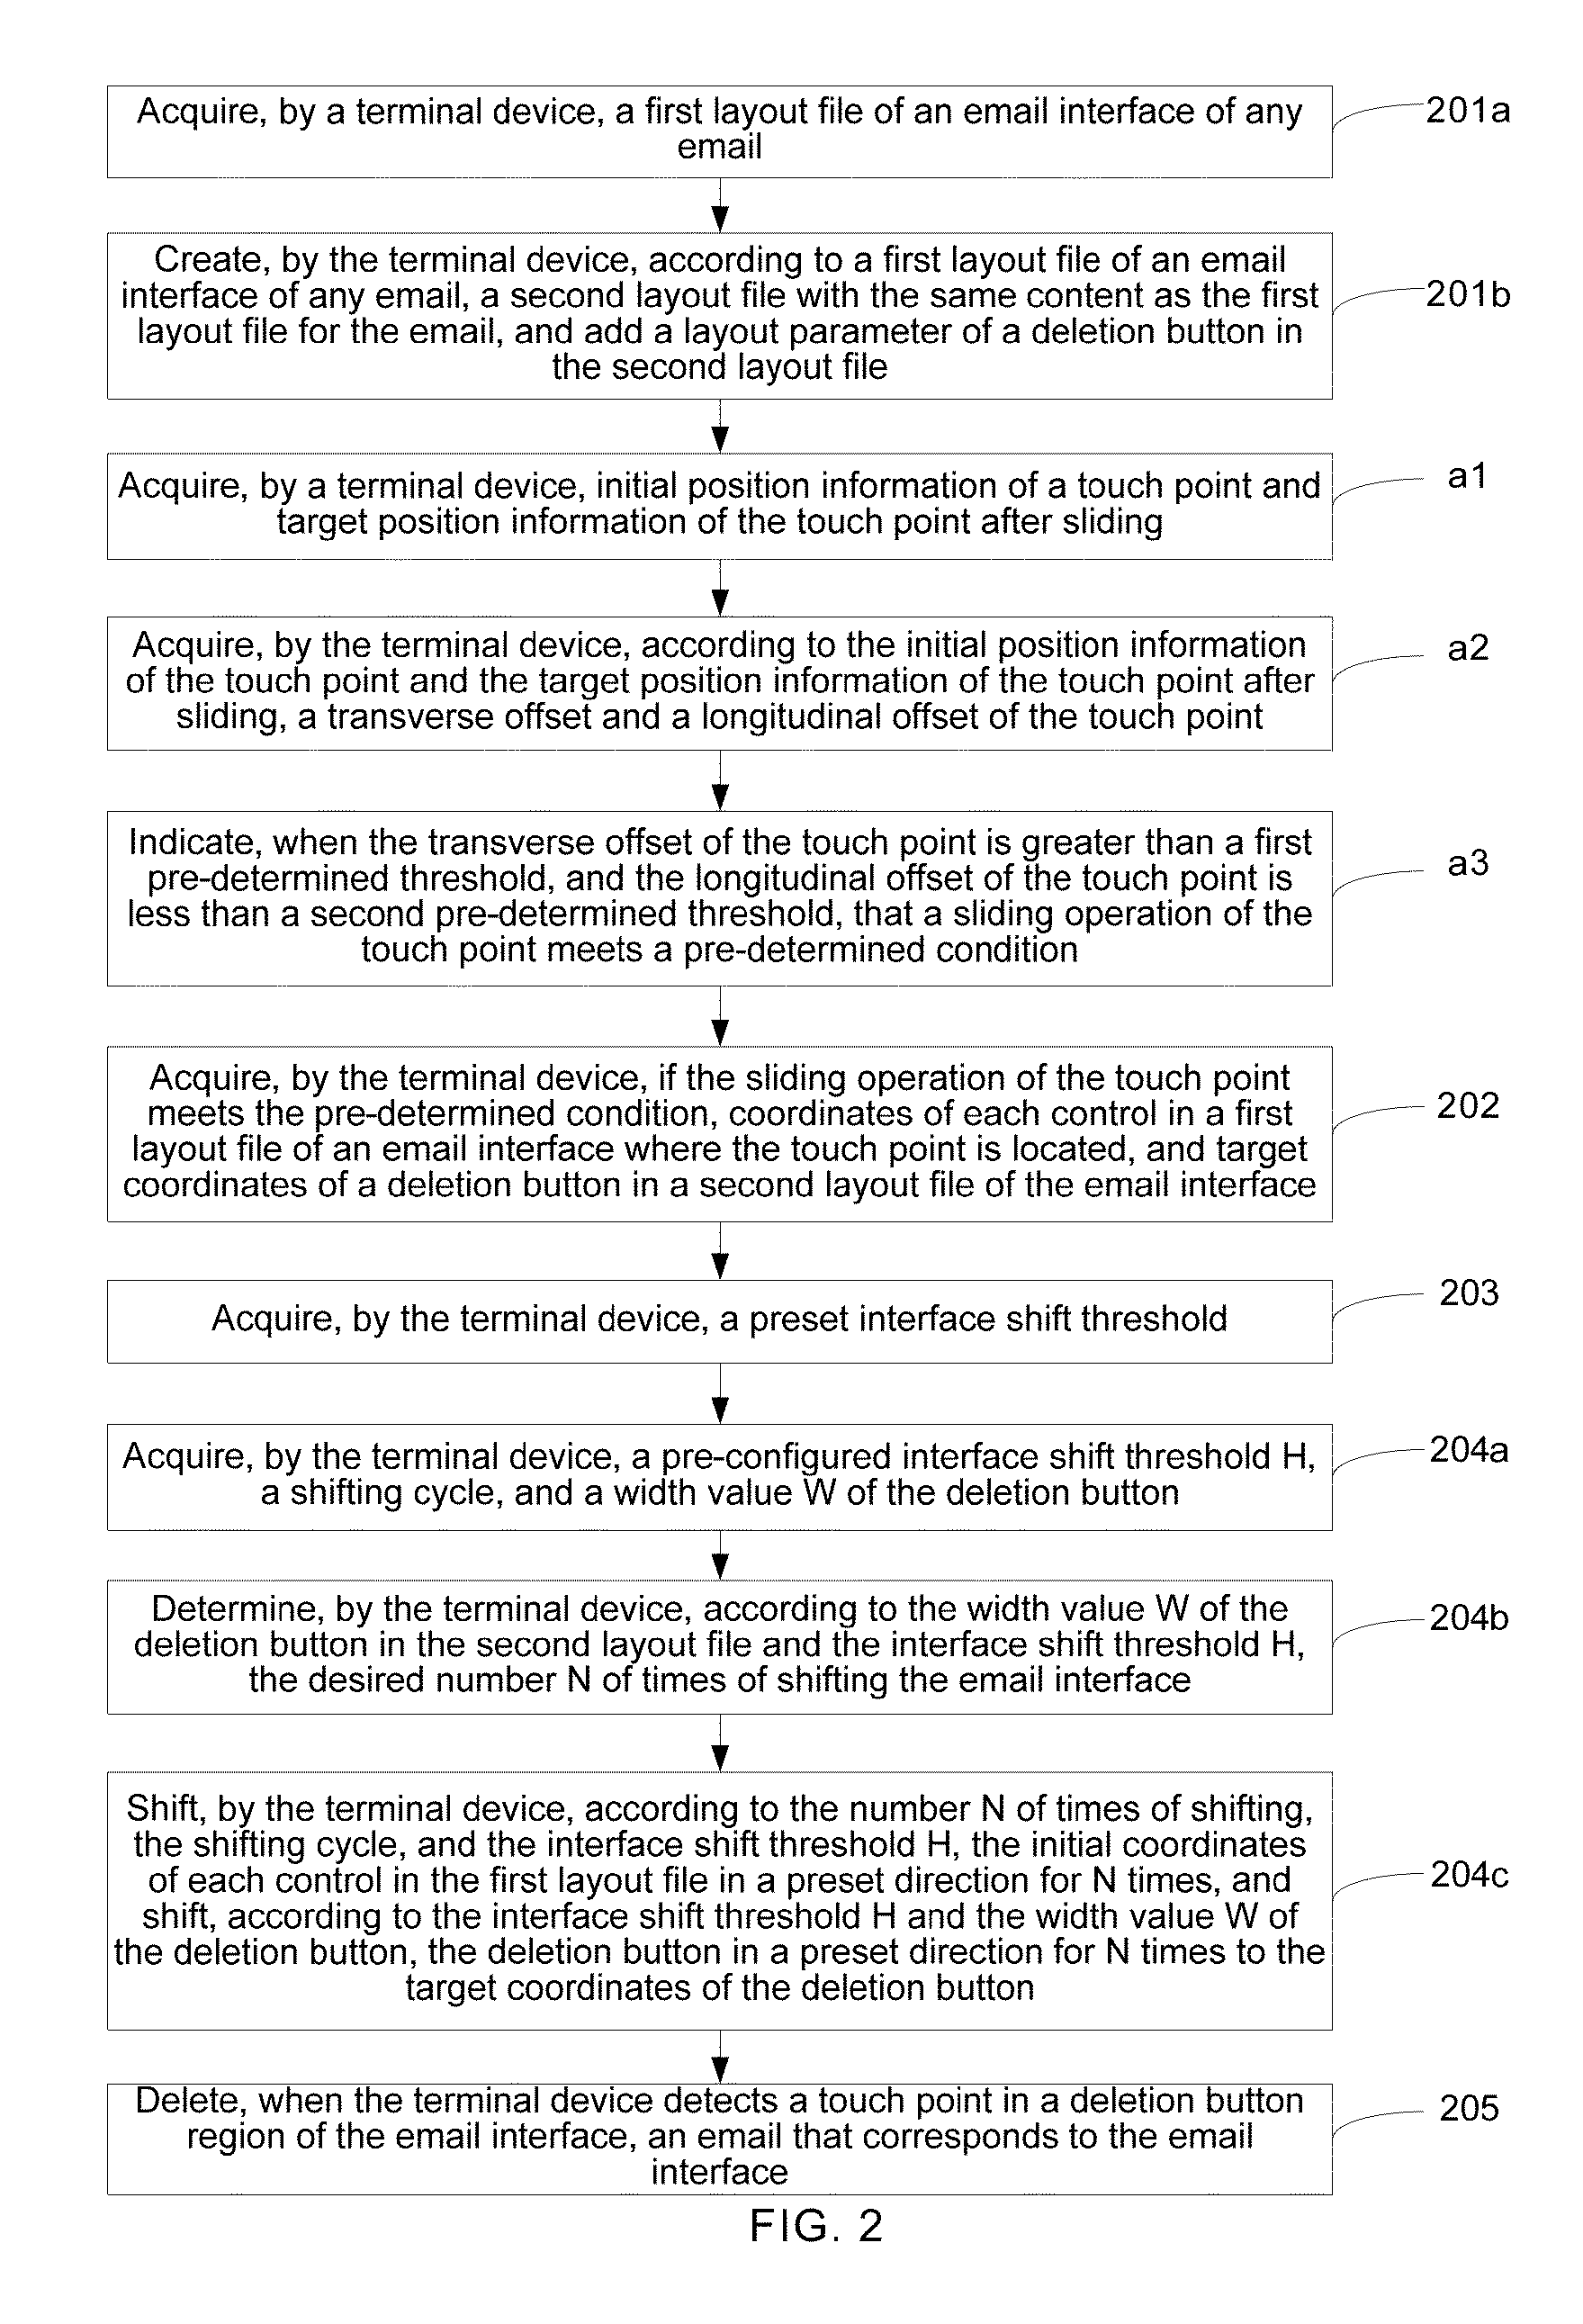 Method for deleting email and terminal device